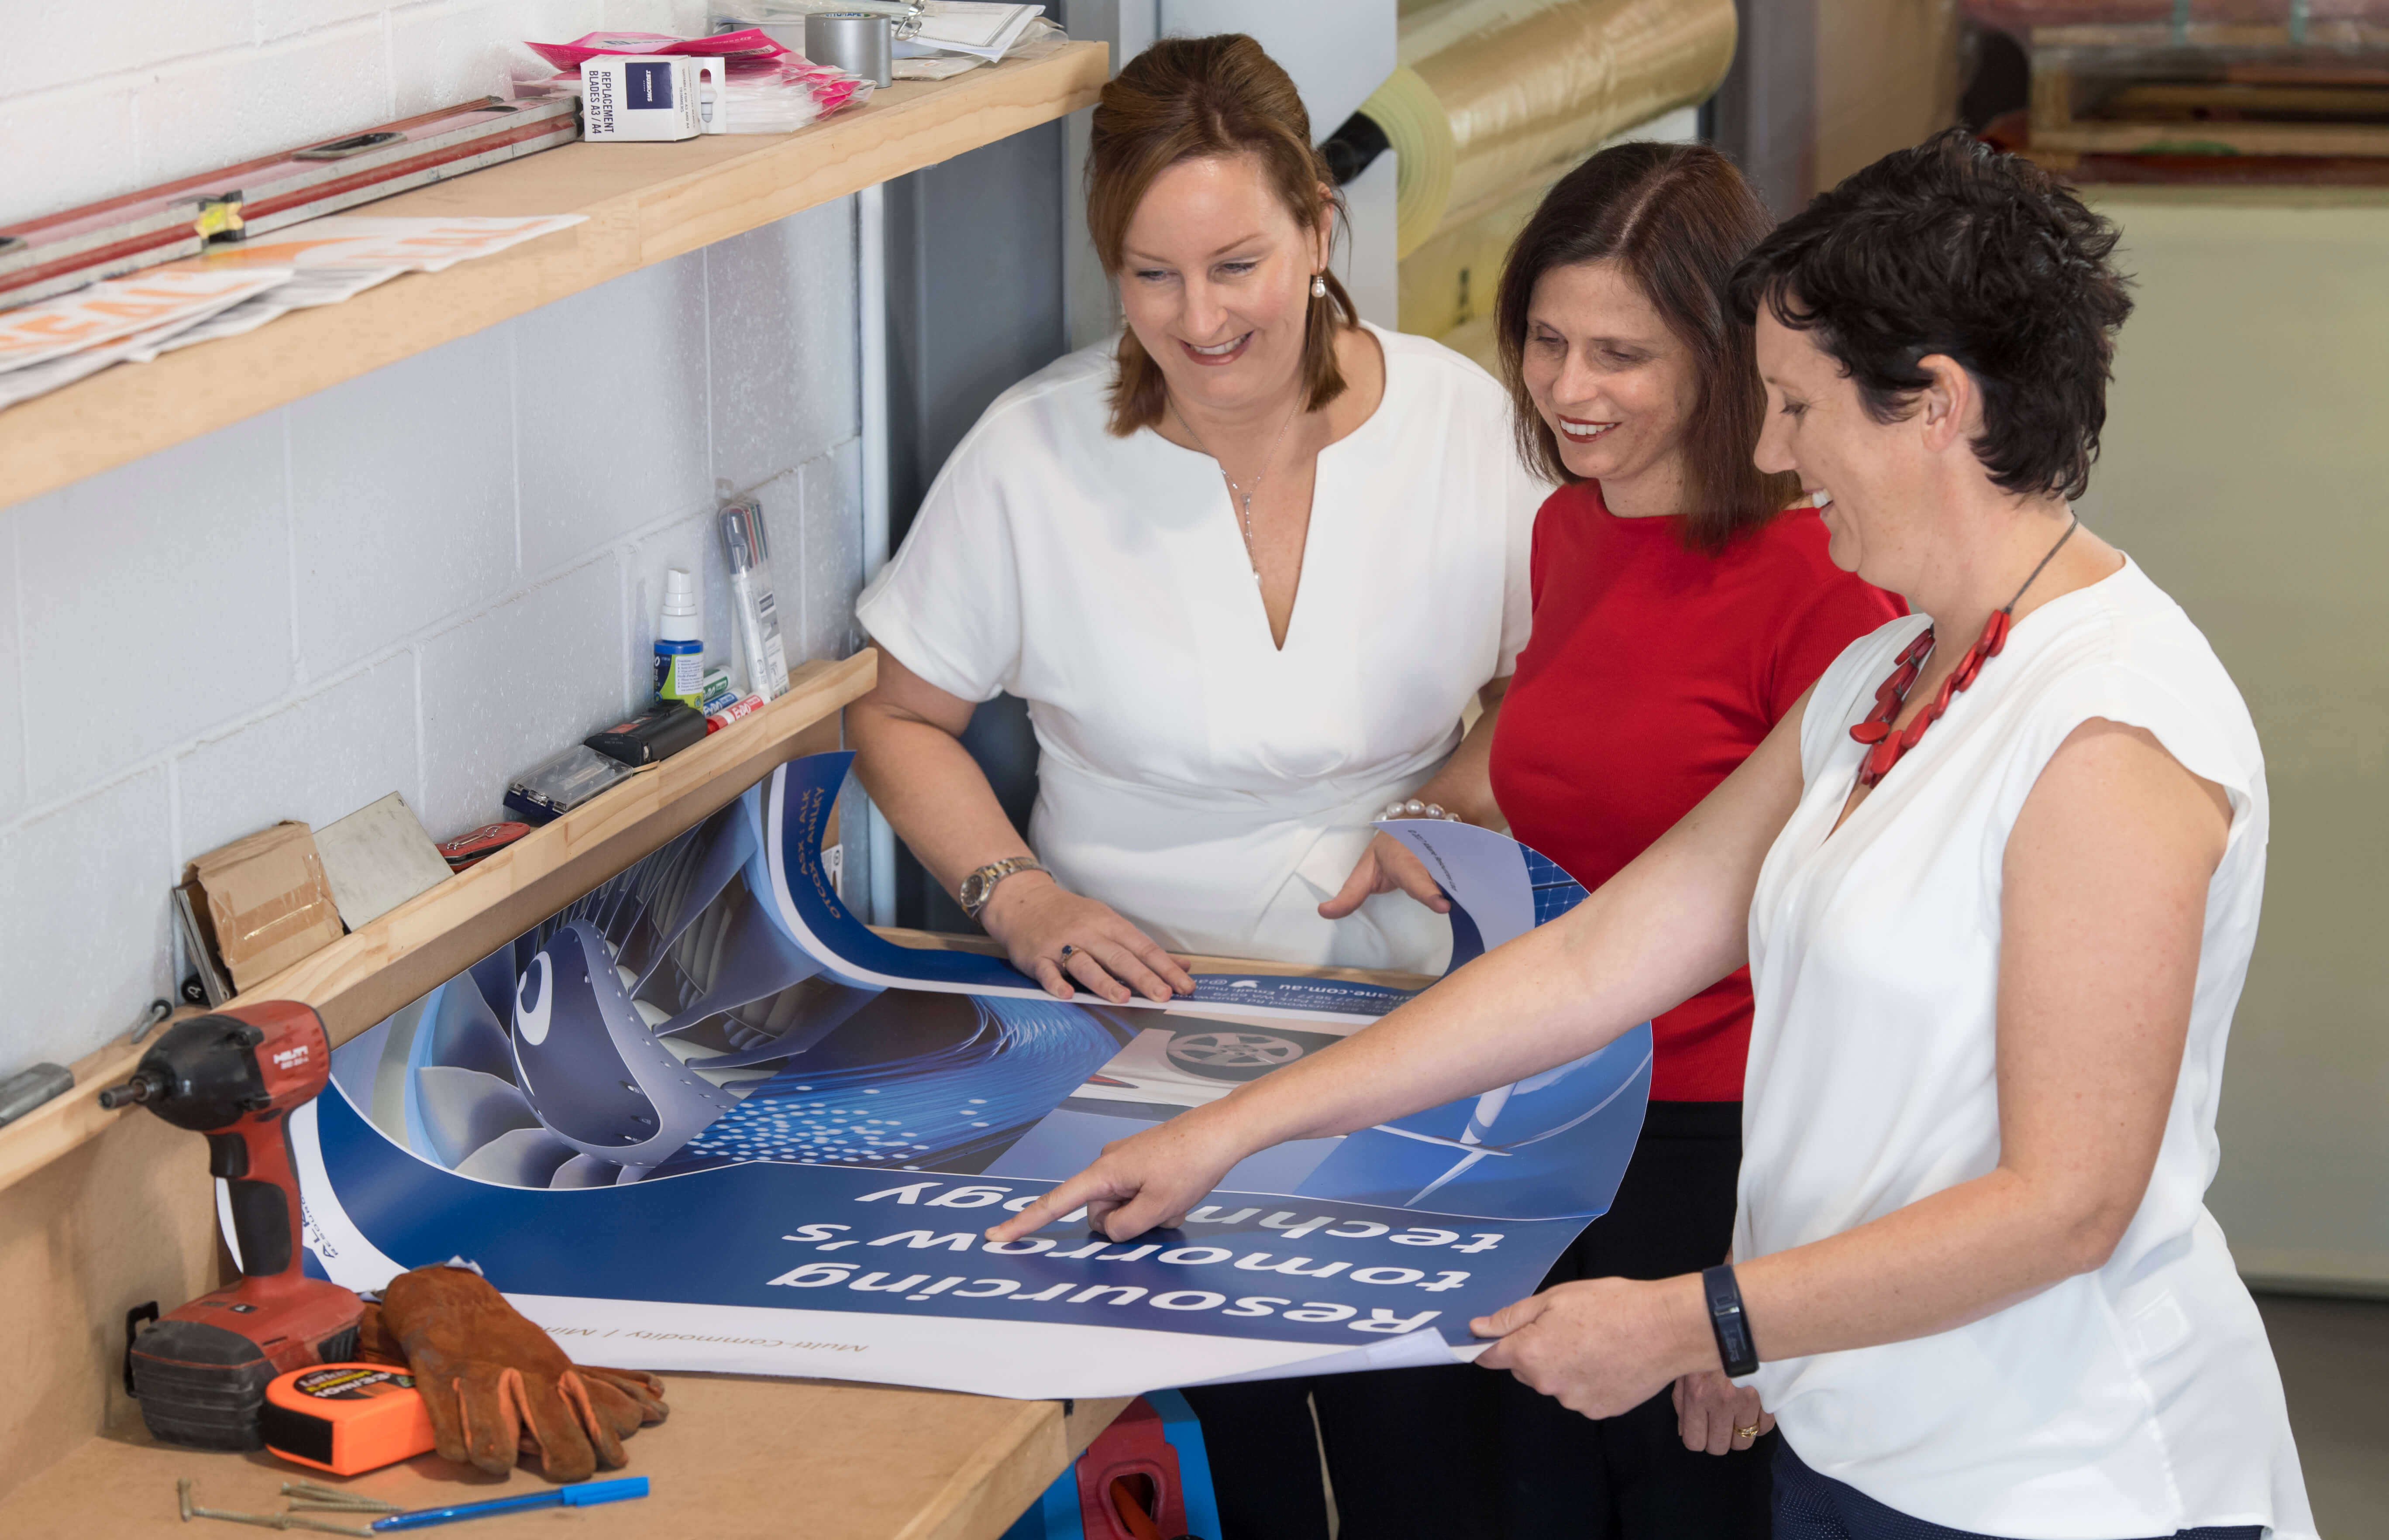 Women in STEM: Three woman look at a blue poster on working table 